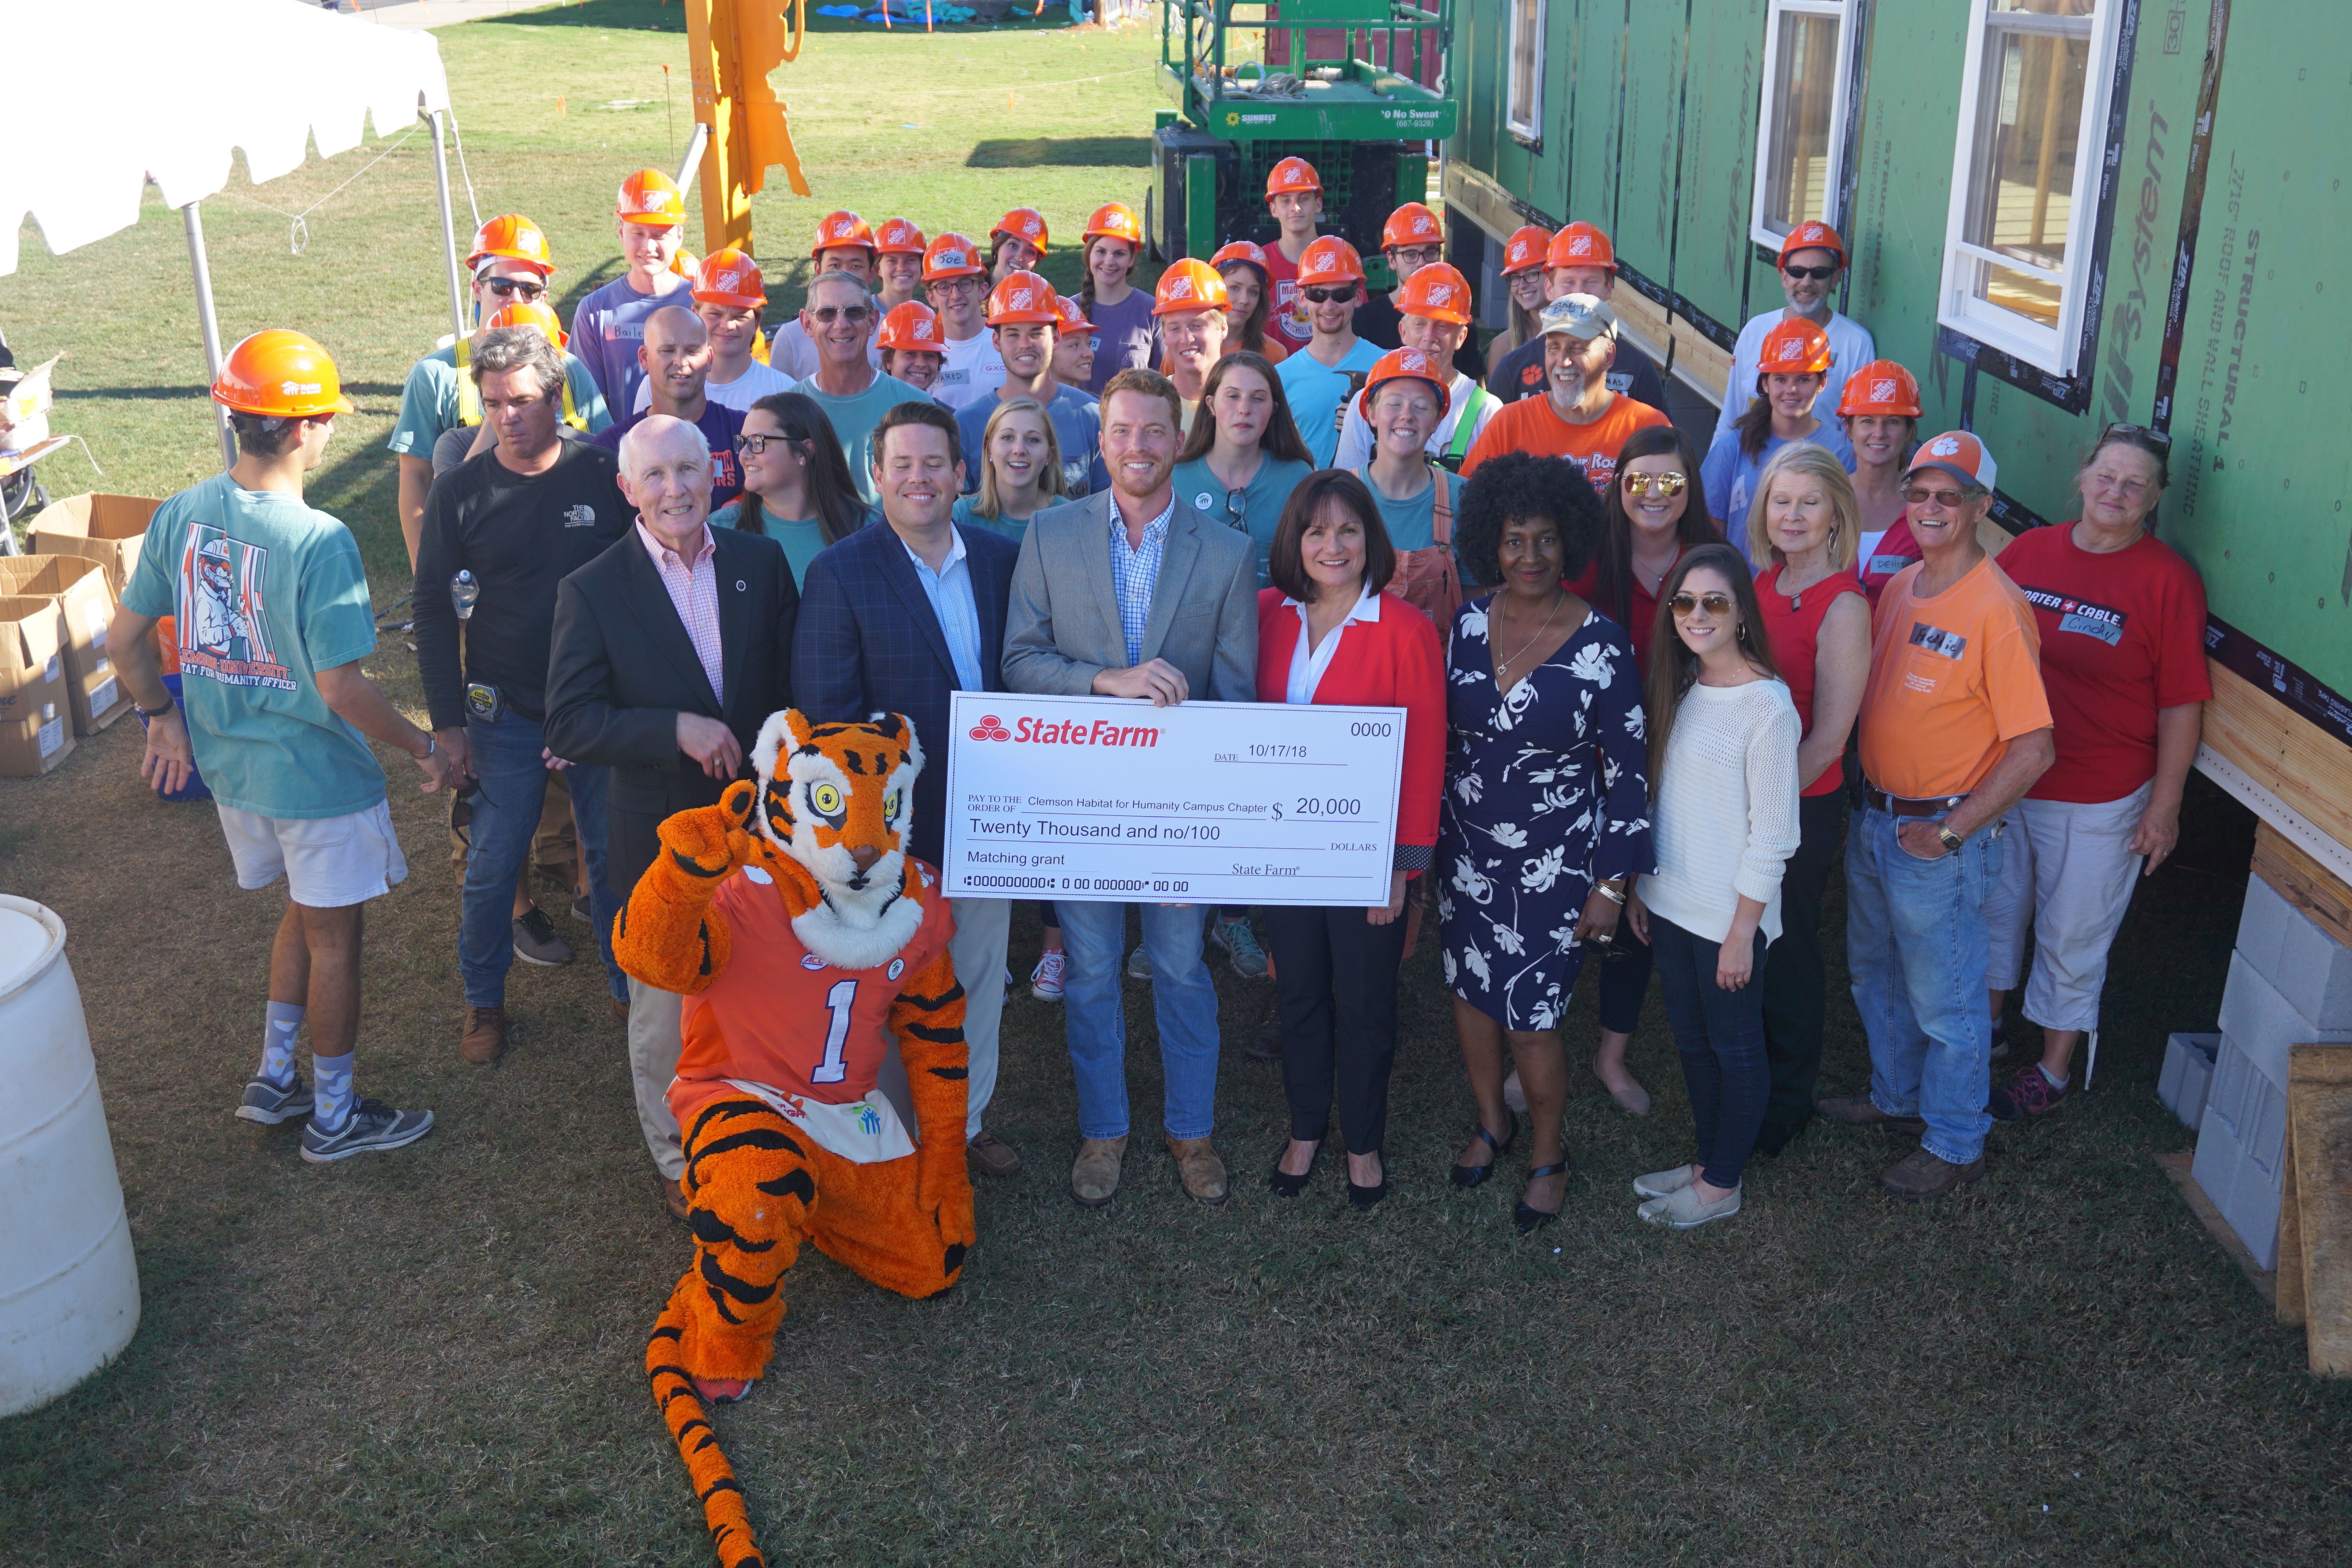 State Farm representatives, Tiger Mascot, and PCHFH staff along with Clemson Habitat students pose with $20,000 check